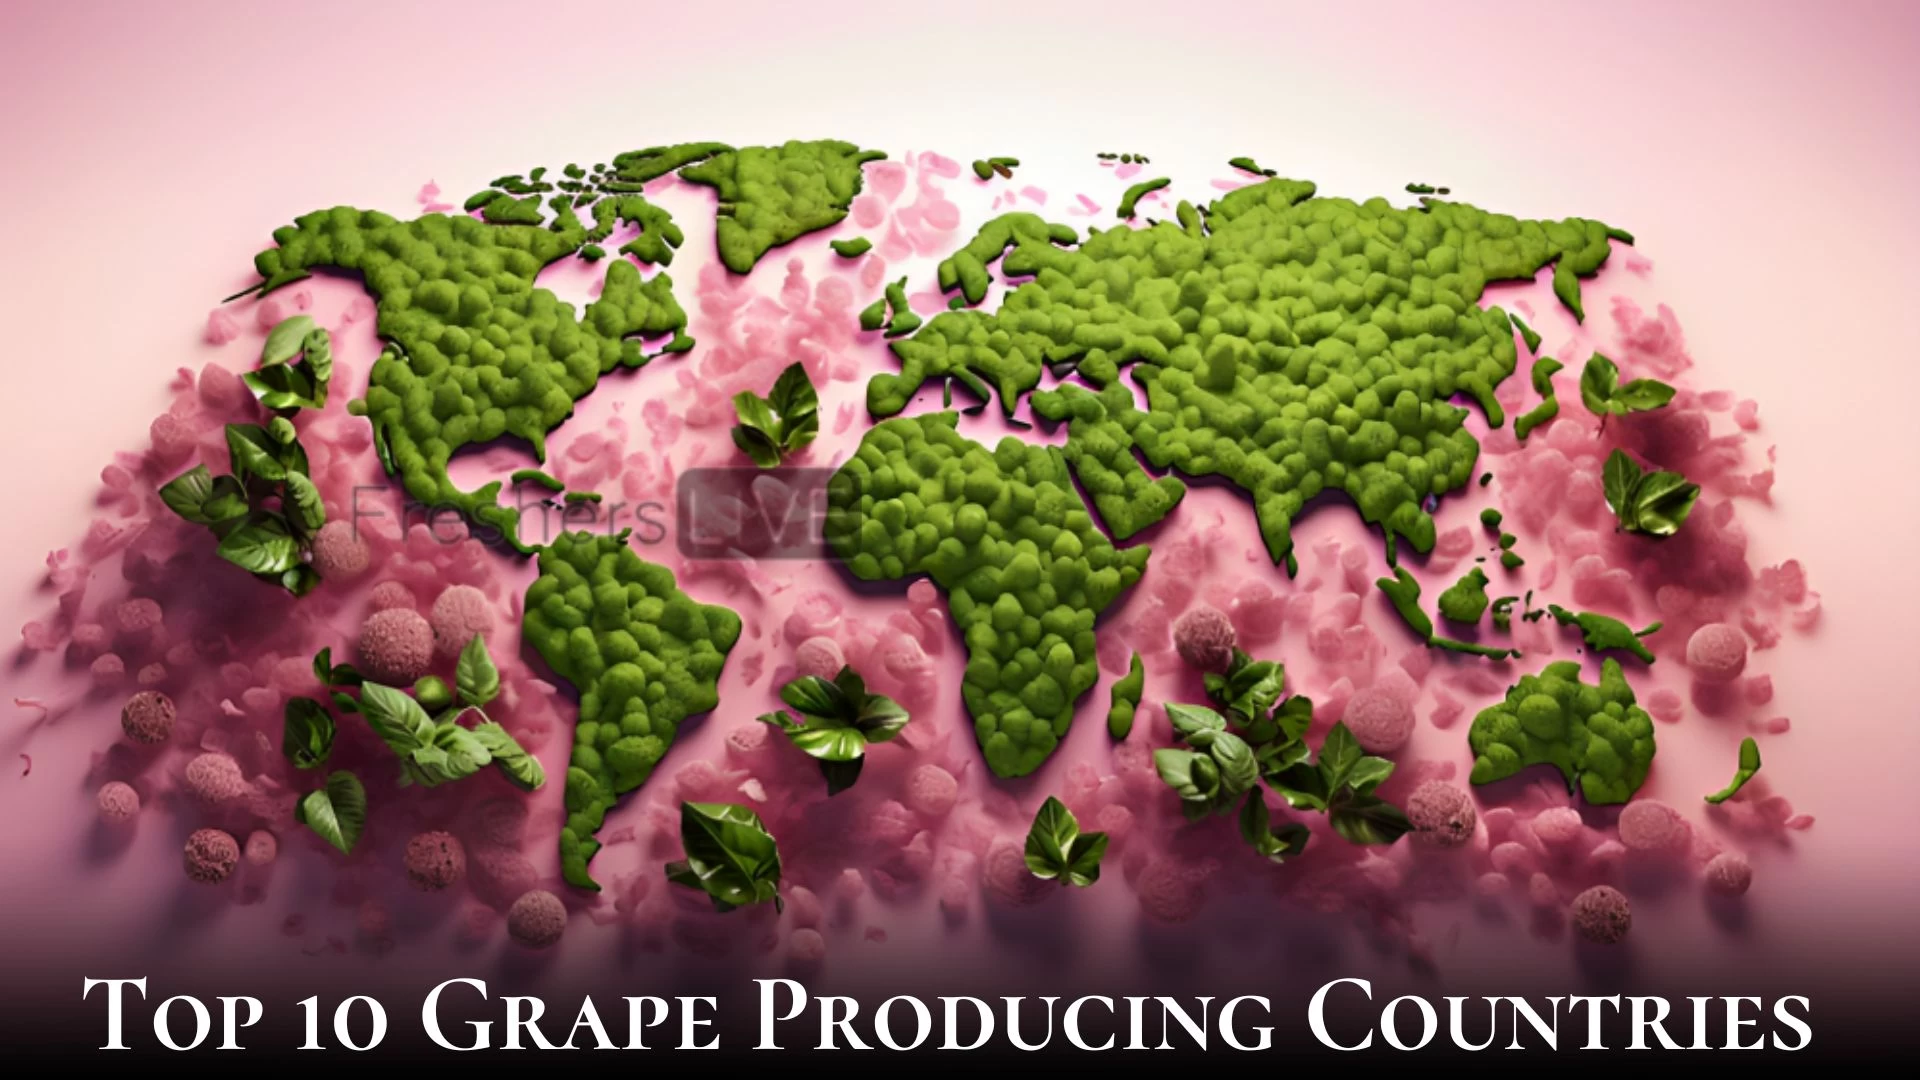 Top 10 Grape Producing Countries in the World - Know the Grape Kings